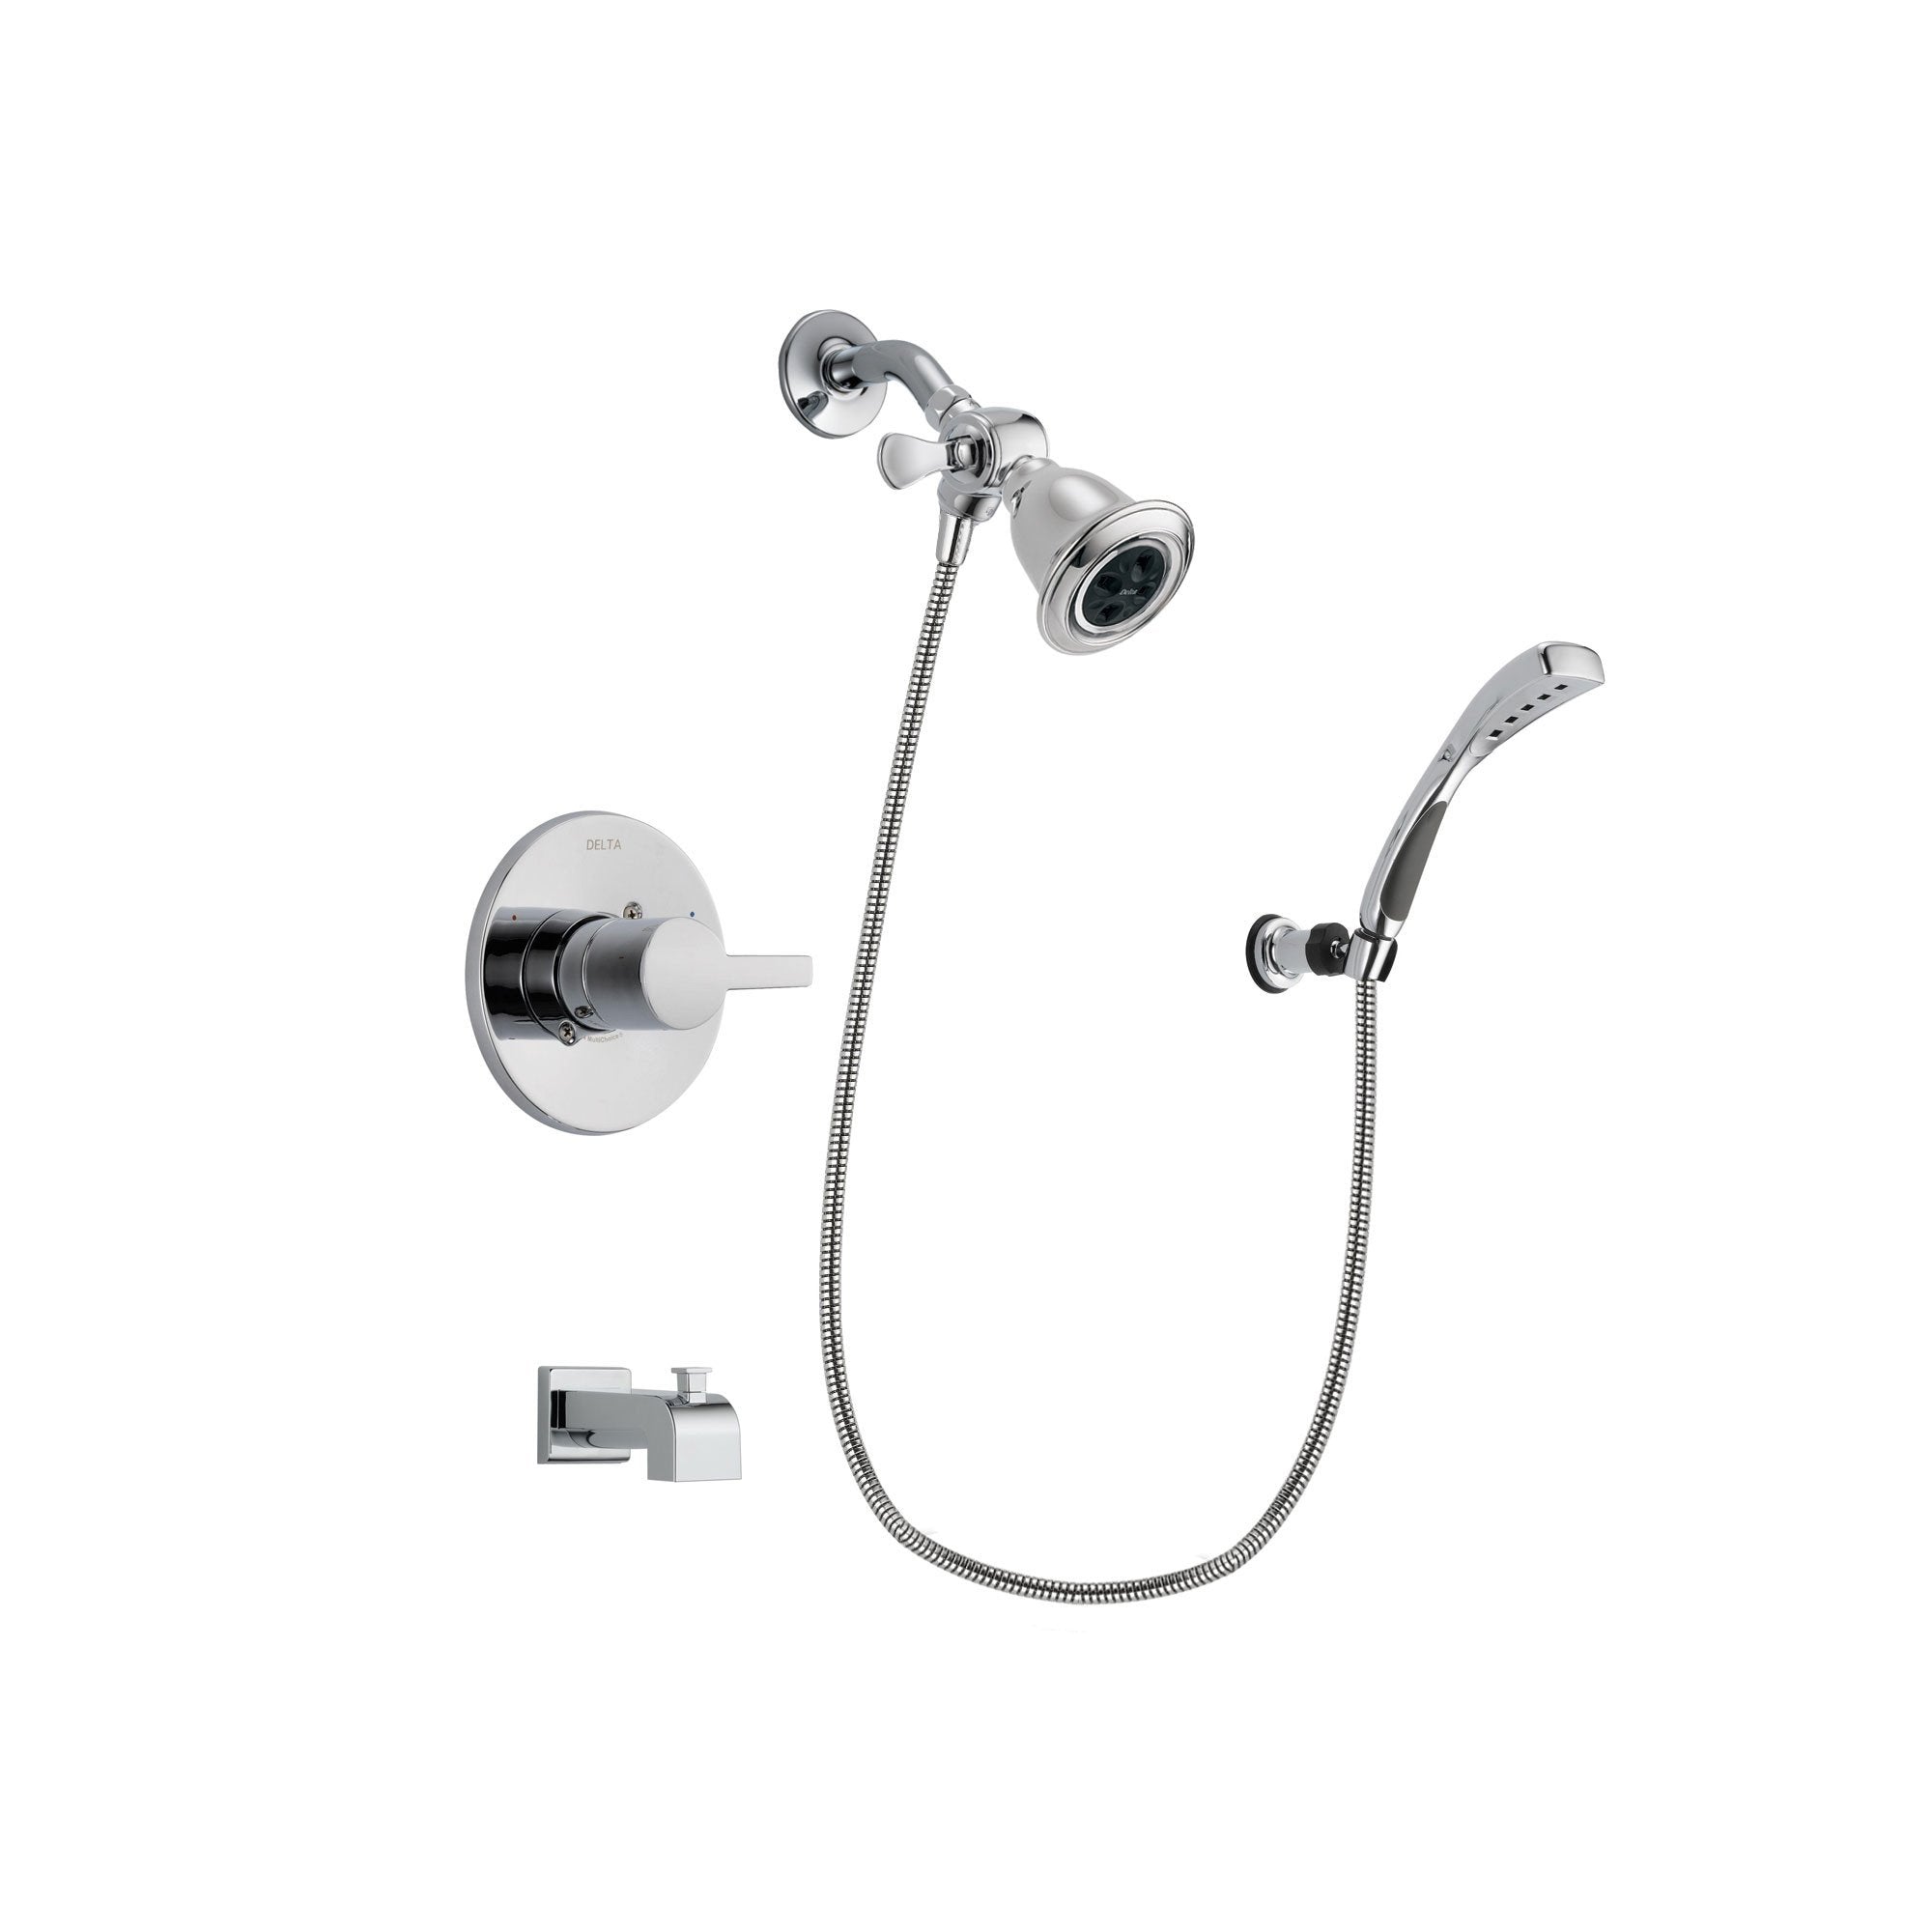 Delta Compel Chrome Finish Tub and Shower Faucet System Package with Water Efficient Showerhead and Wall-Mount Bracket with Handheld Shower Spray Includes Rough-in Valve and Tub Spout DSP1017V